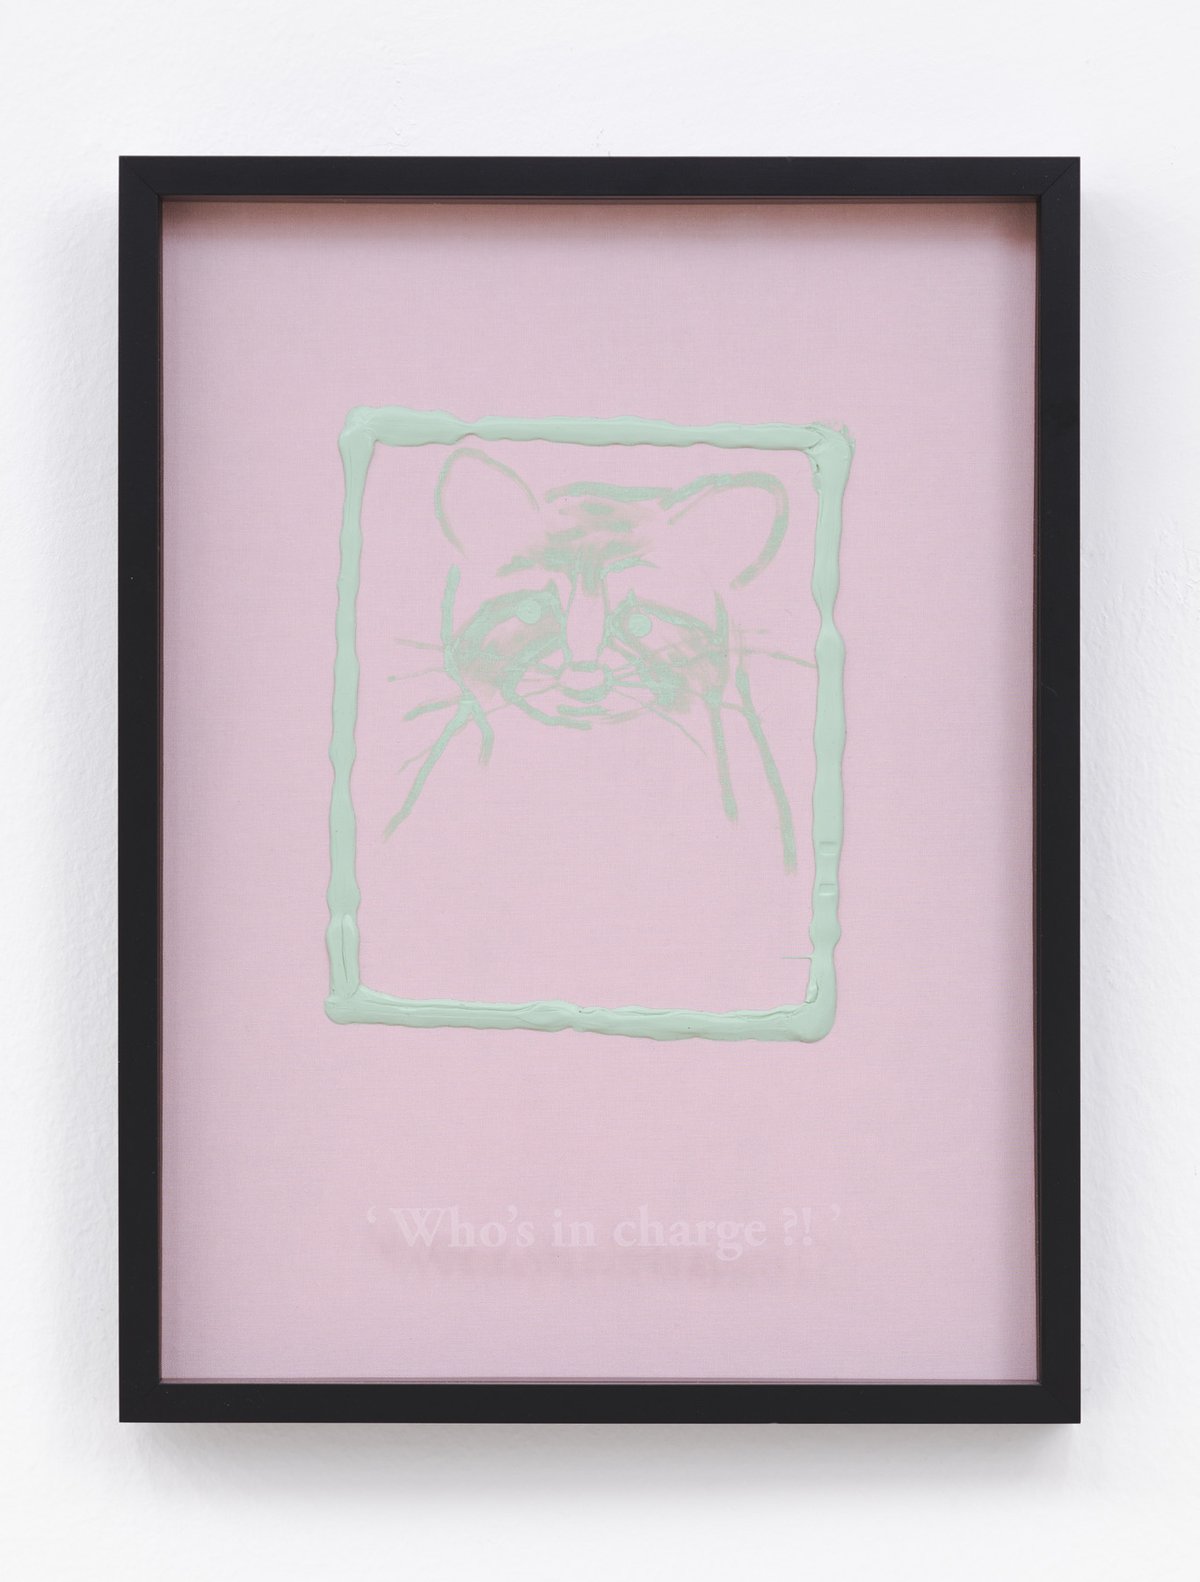 Philipp Timischl&quot;Who&#x27;s in charge?!&quot; (Rose/Mint), 2017Acrylic on linen and glass-engraved object frame40.1 x 32.1 cm